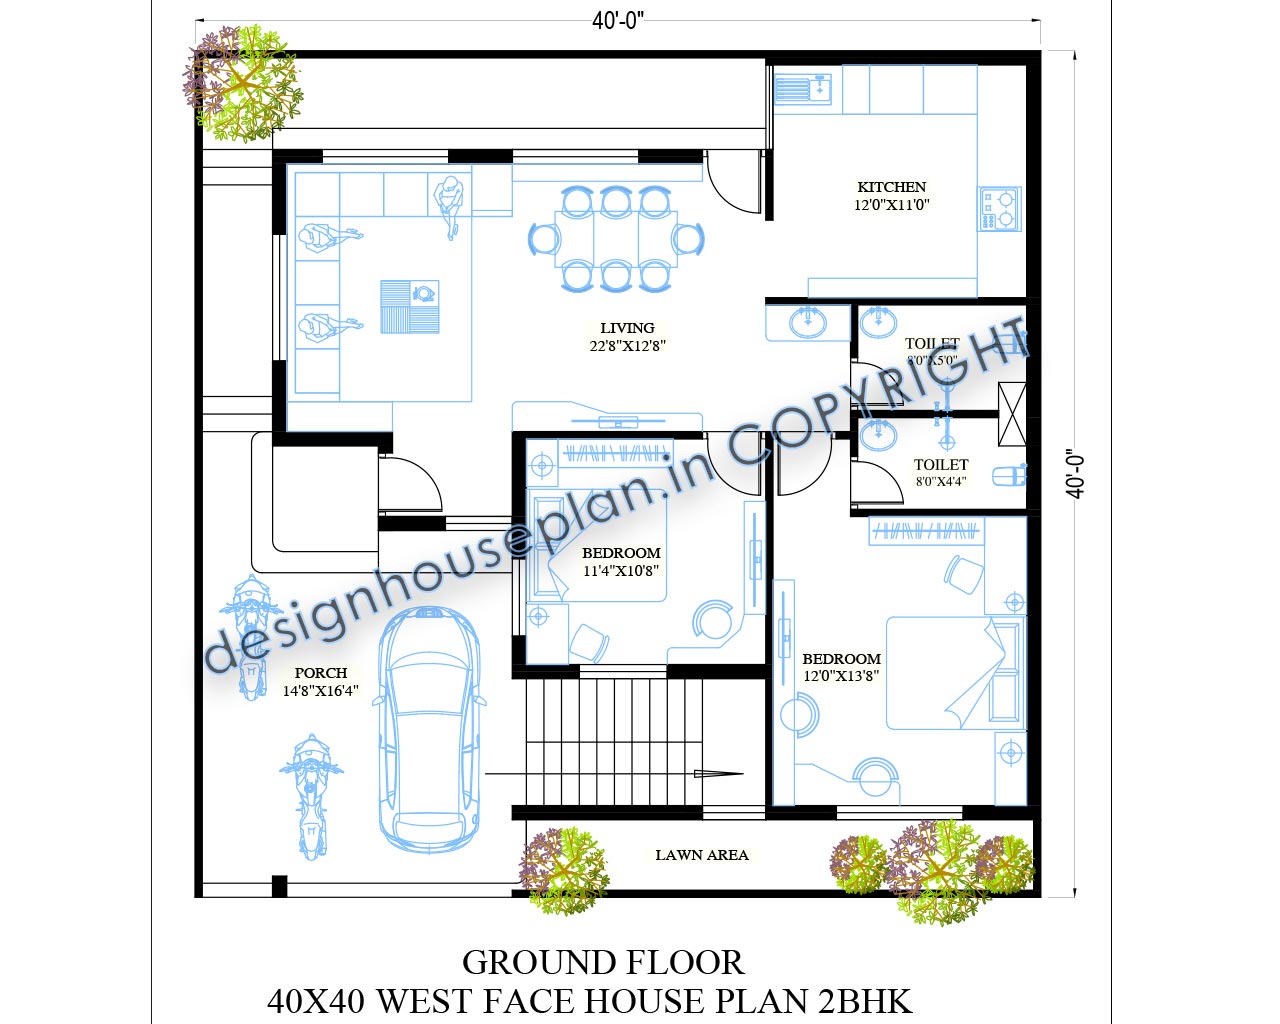 It is a 40x40 house plans 2 bedroom with car parking and it is a west facing house plan.